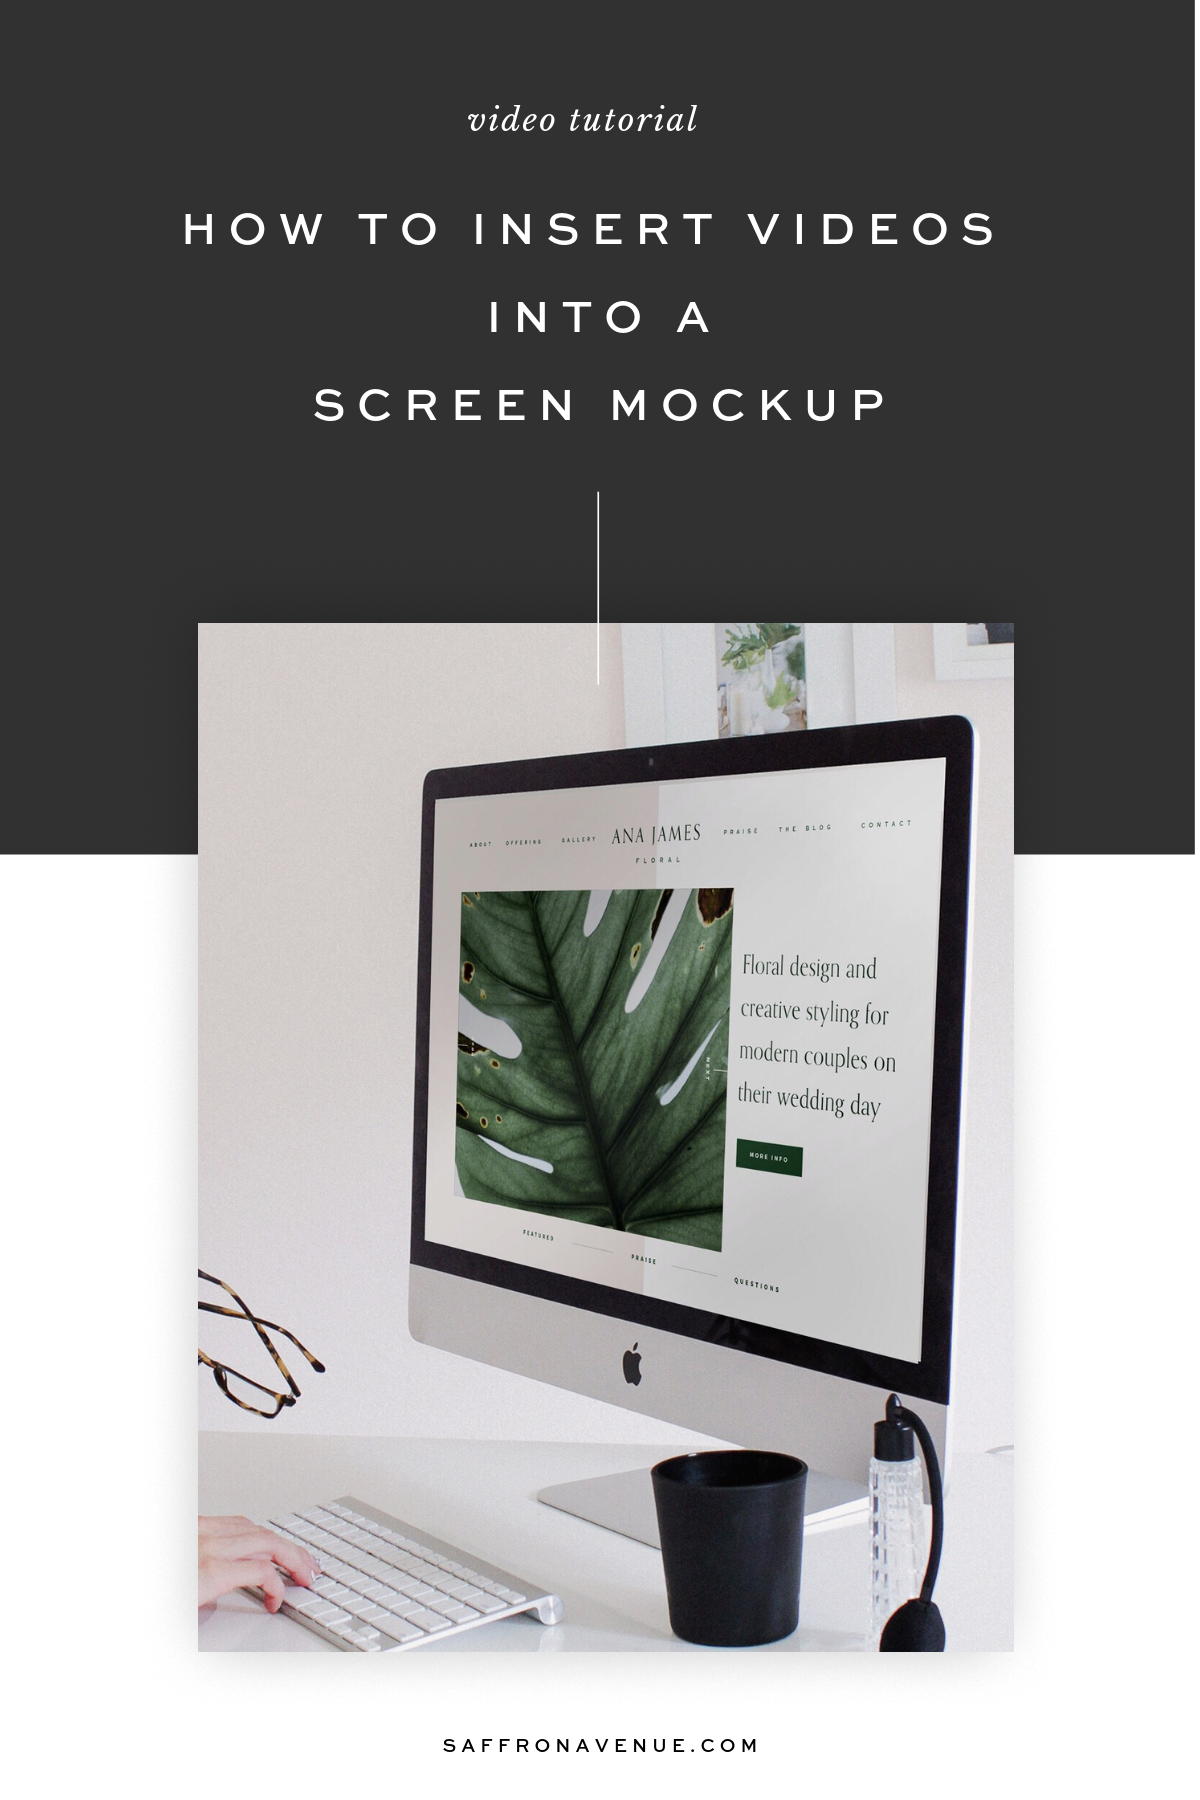 Insert Video Into An Image Mockup